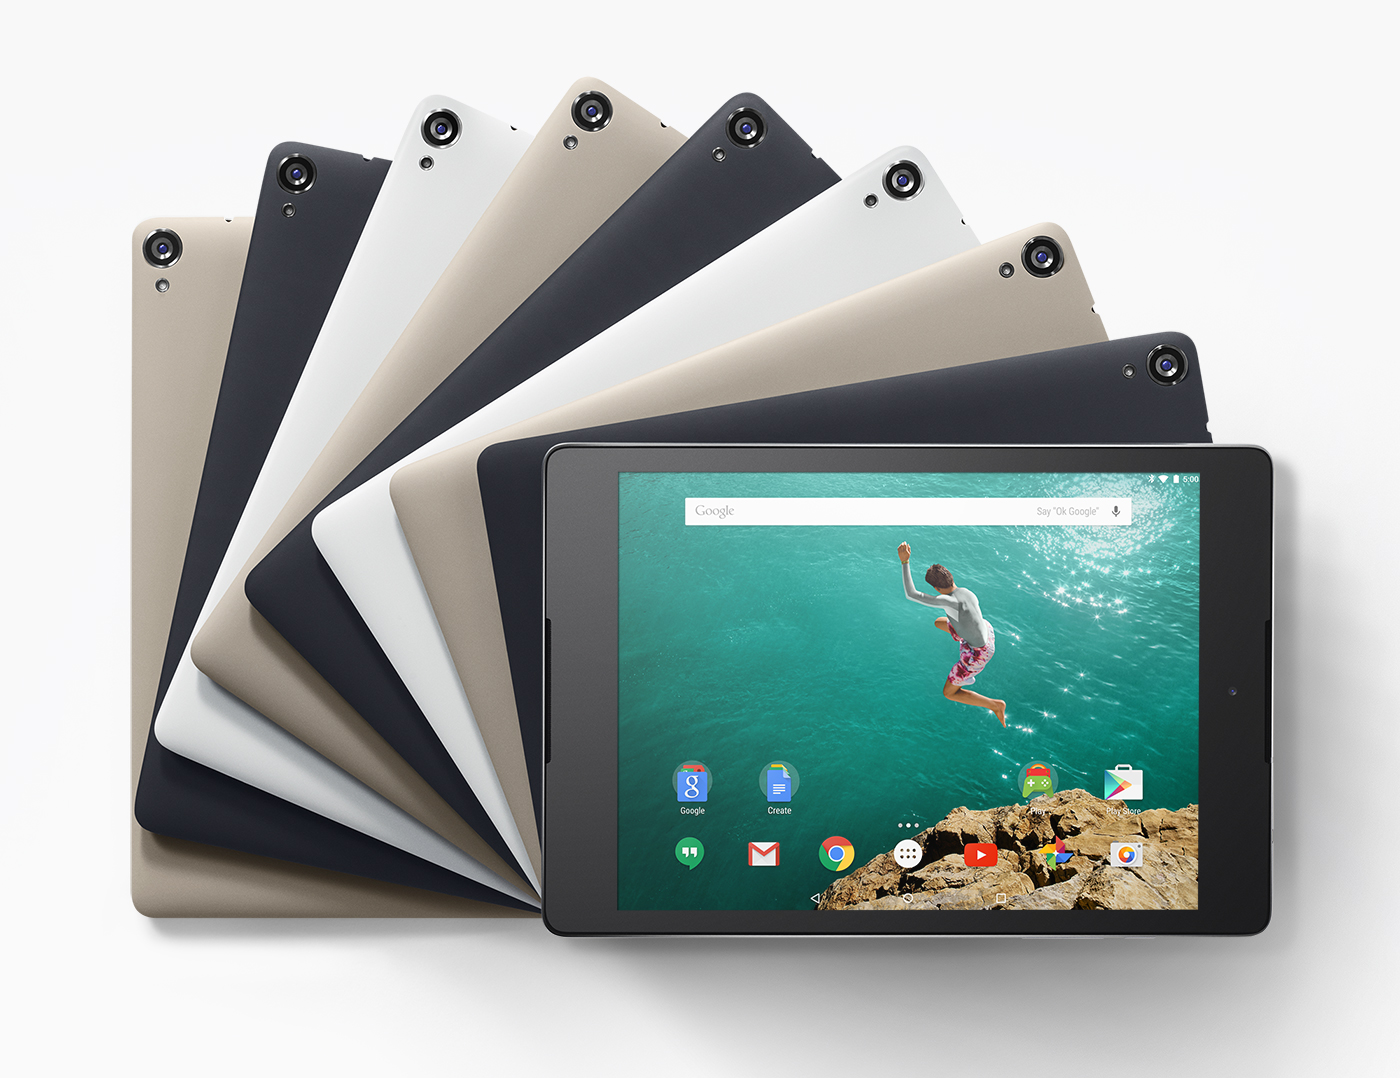 Nexus 9 - for some reason we don't have an alt tag here